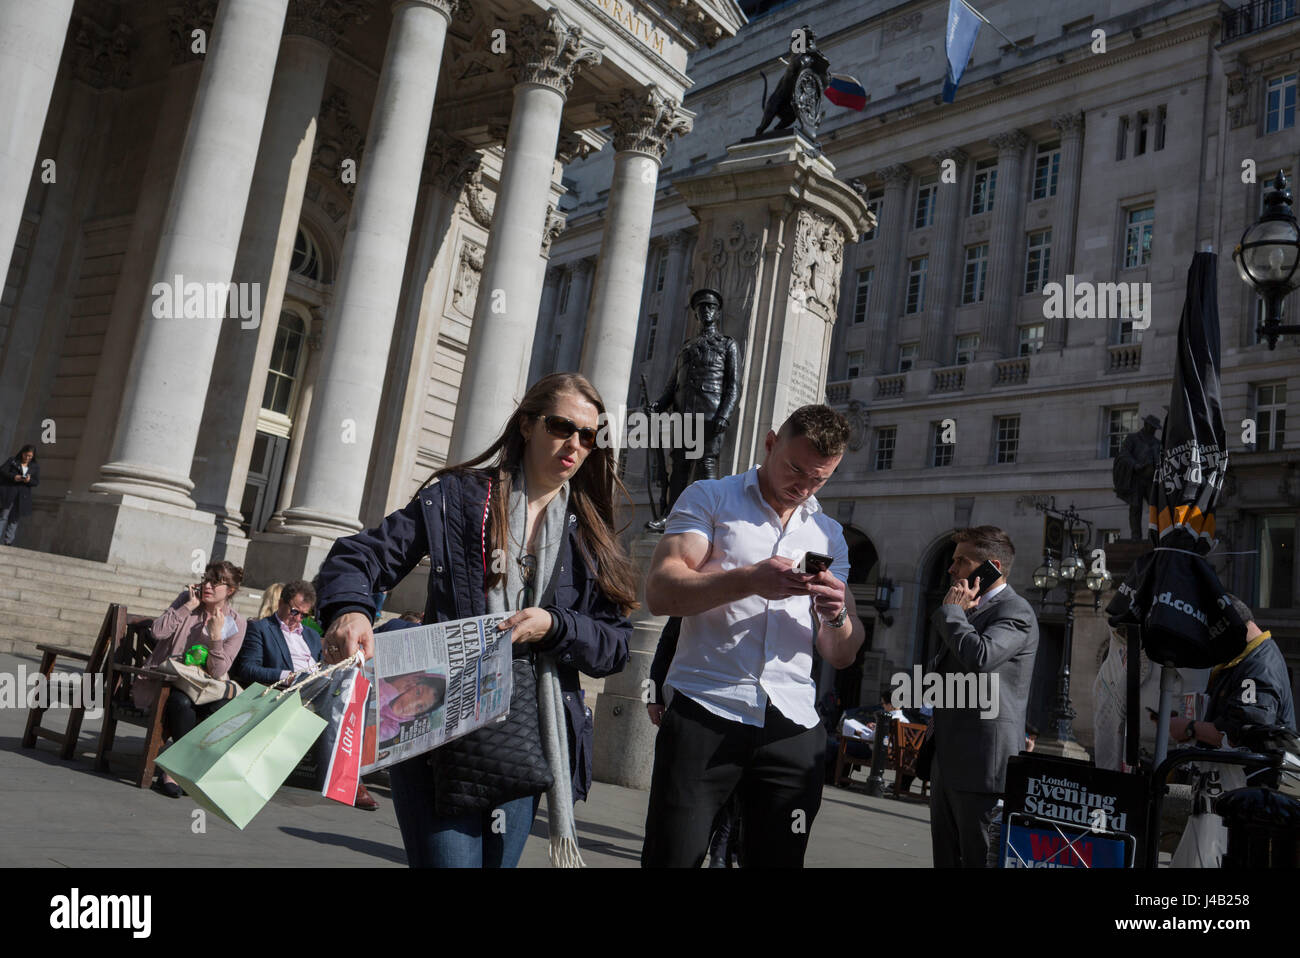 As a woman carries her copy of the Evening Standard newspaper, a muscular young man checks messages below the classical architecture of Royal Exchange and the WW1 war memorial at Bank Triangle, on 10th May 2017, in the City of London, England. Stock Photo